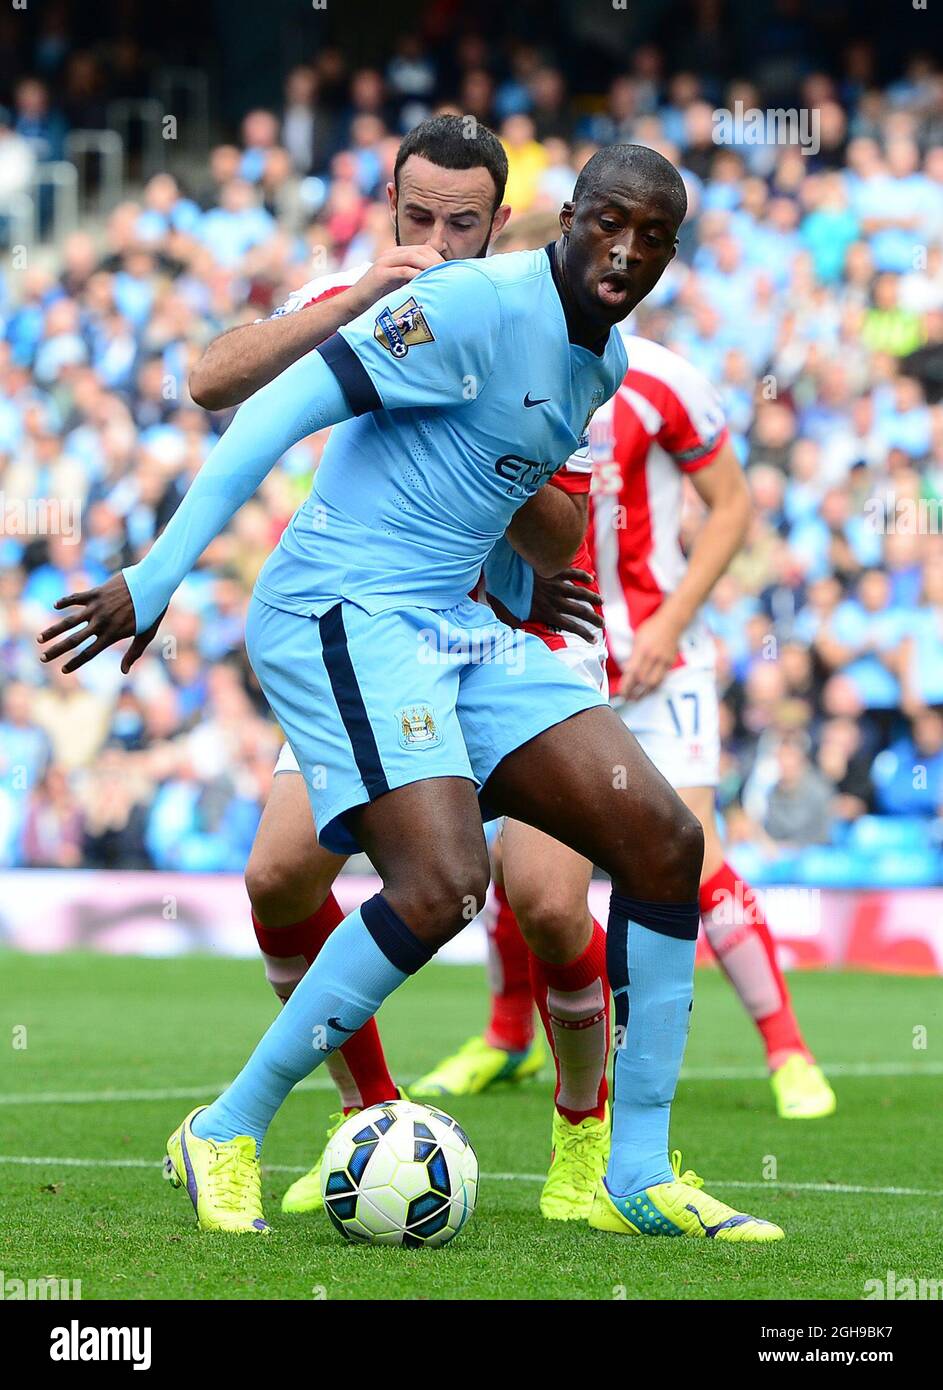 Yaya Toure of Manchester City in action during the Barclays Premier League  match between Manchester City and Stoke City in Etihad Stadium, Manchester  on August 30, 2014. Picture Simon Bellis/Sportimage Stock Photo -